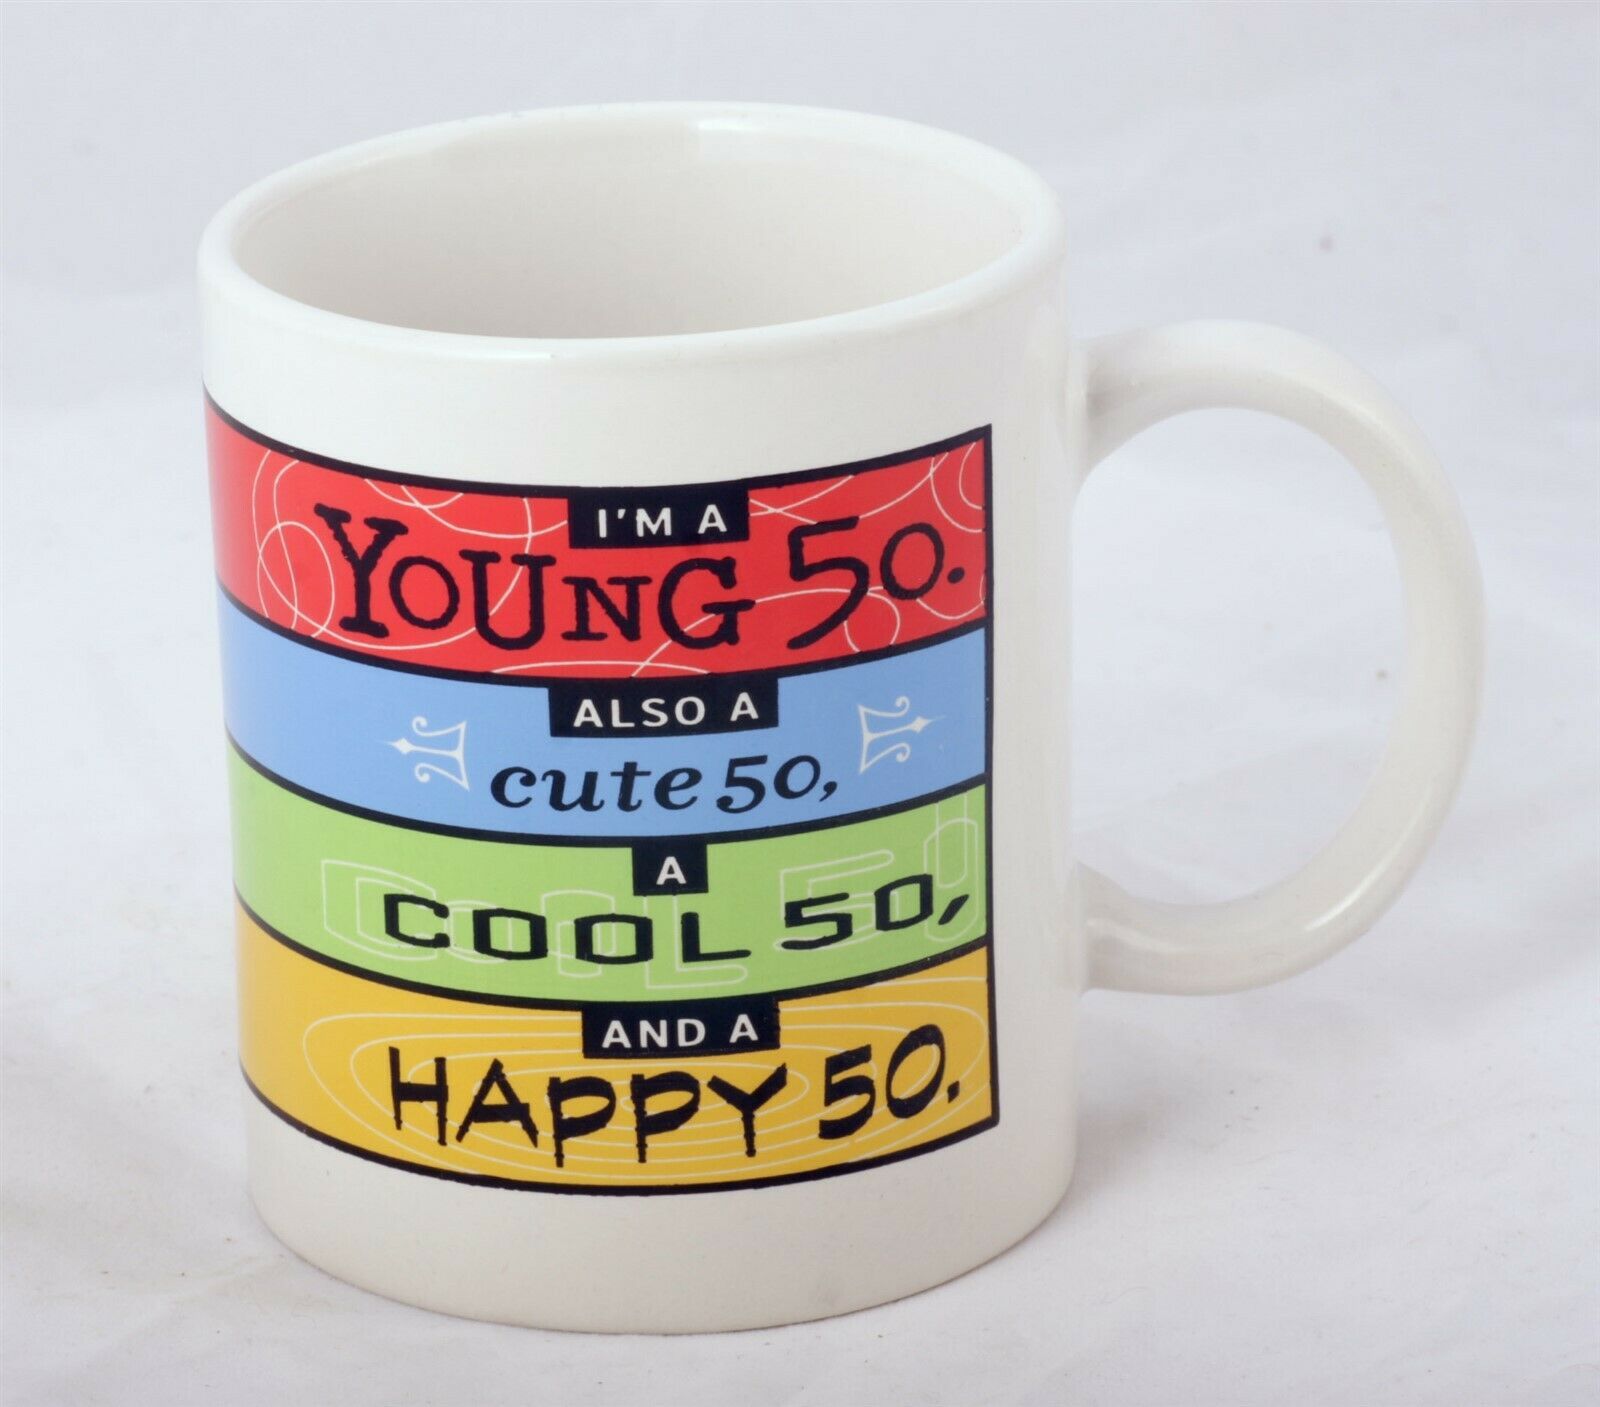 Coffee Mug - I'm A Young 50 Also A Cute 50 A Cool 50 and A Happy 50 - $7.50